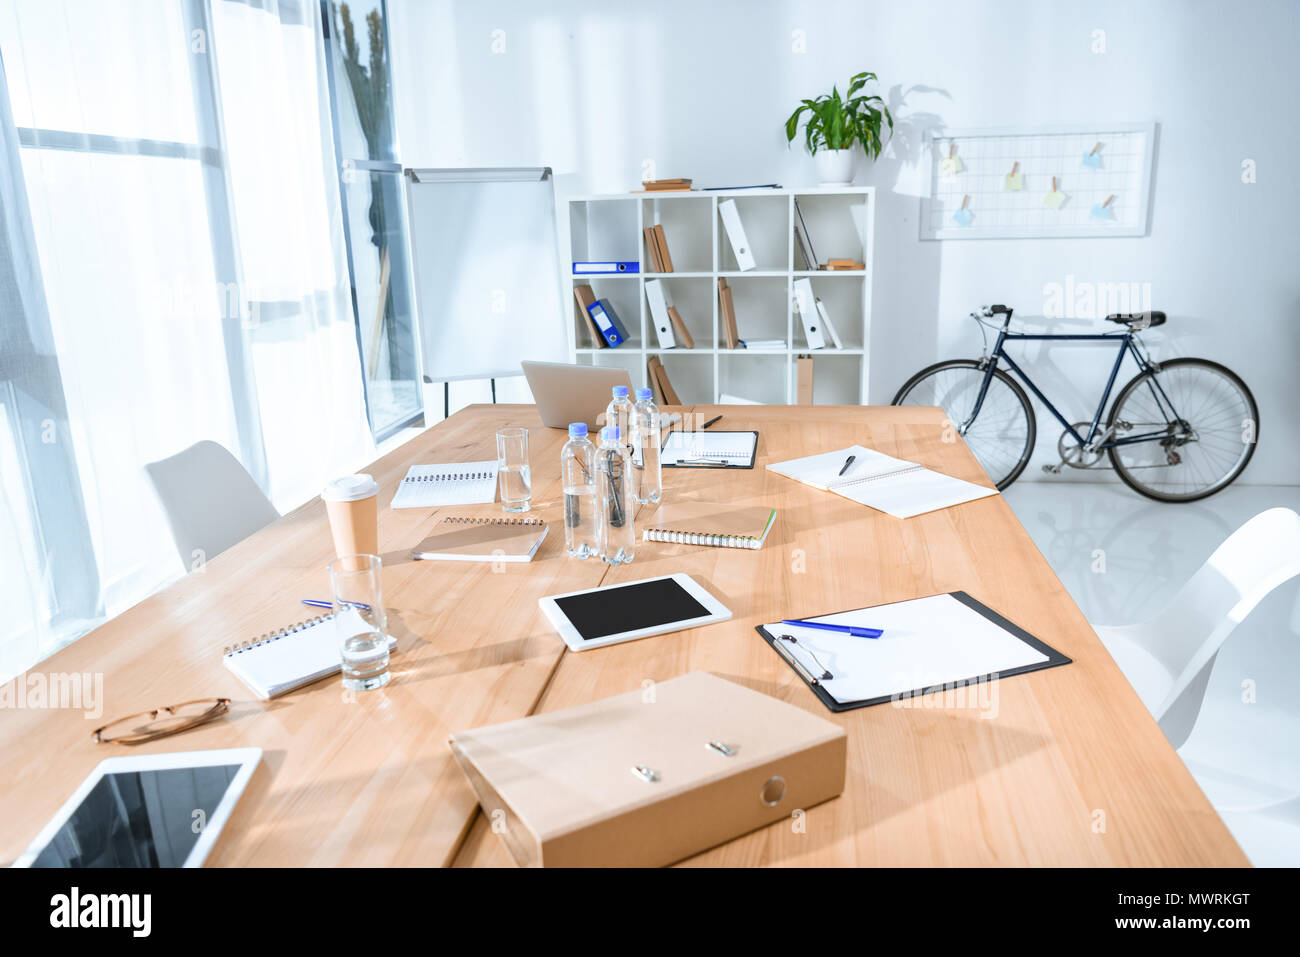 view of empty office interior with table and bicycle against wall Stock Photo